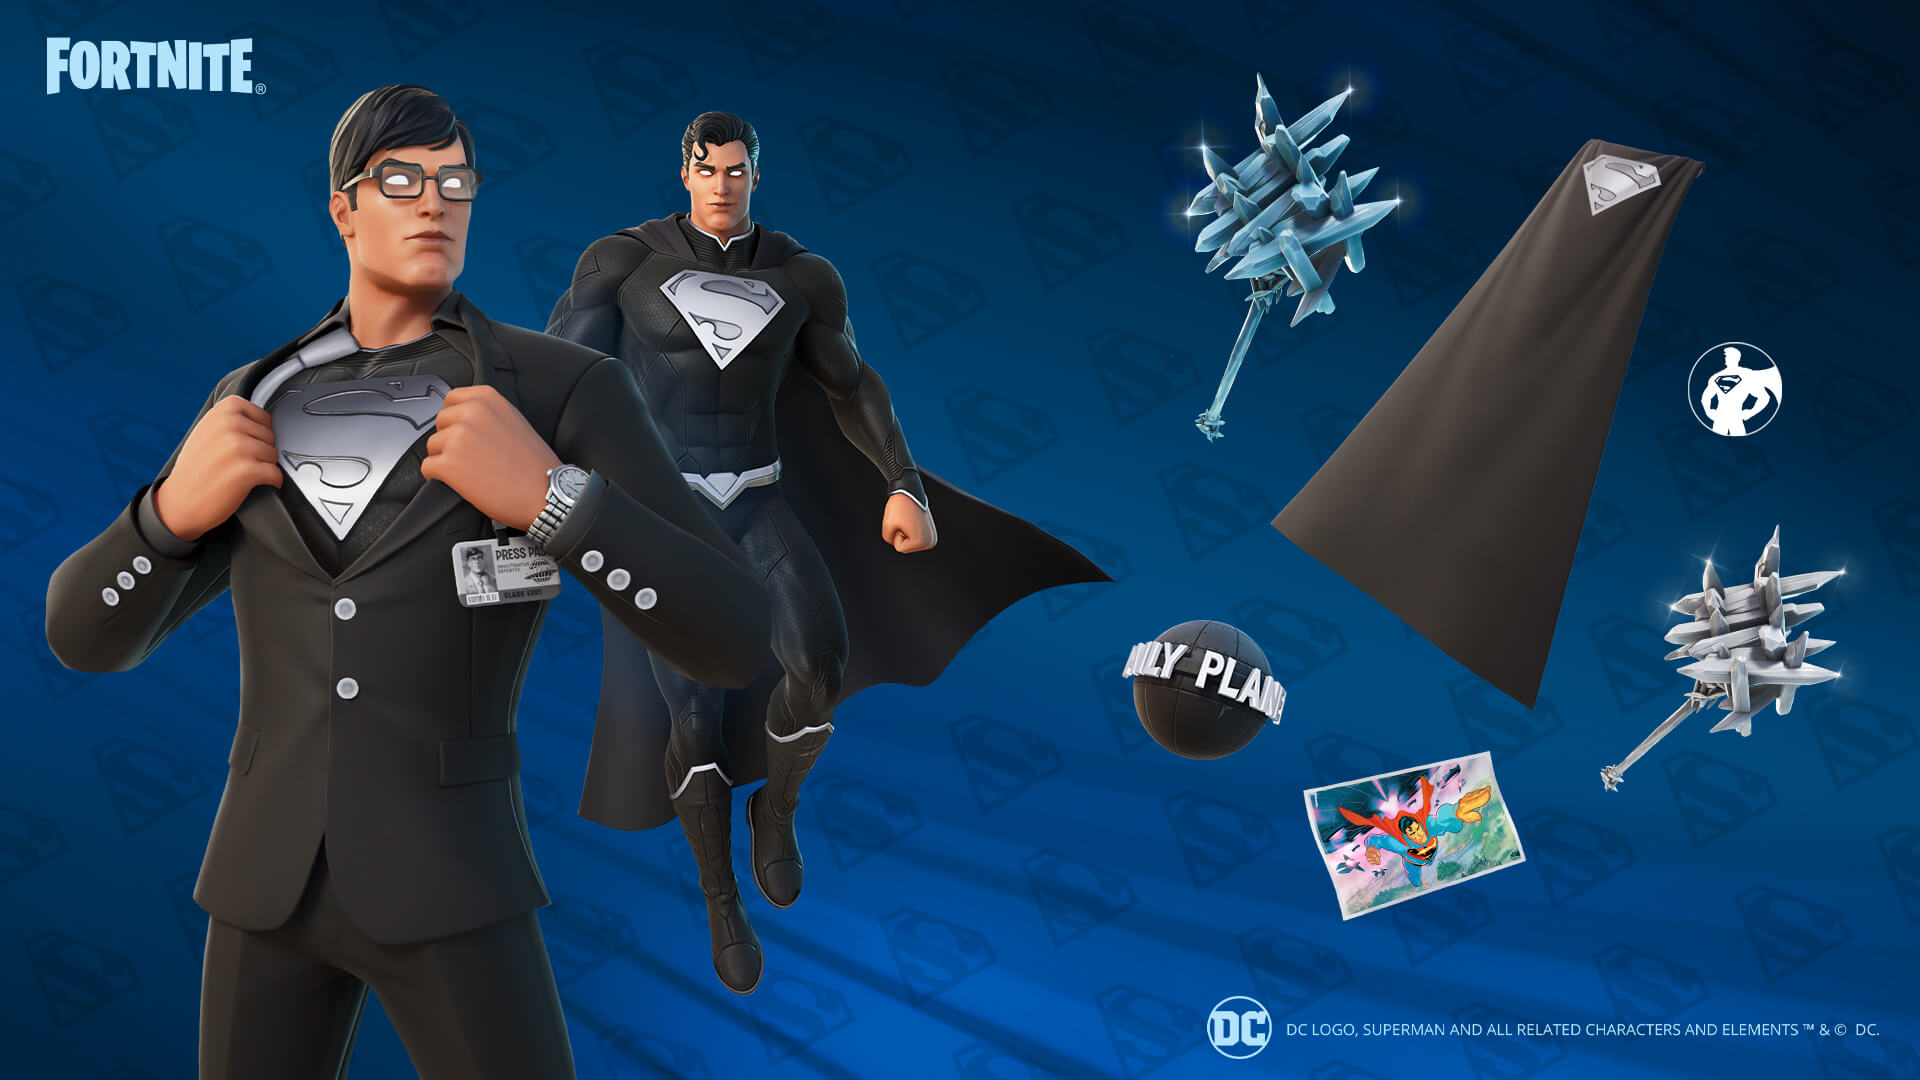 DC's Superman has arrived in Fortnite